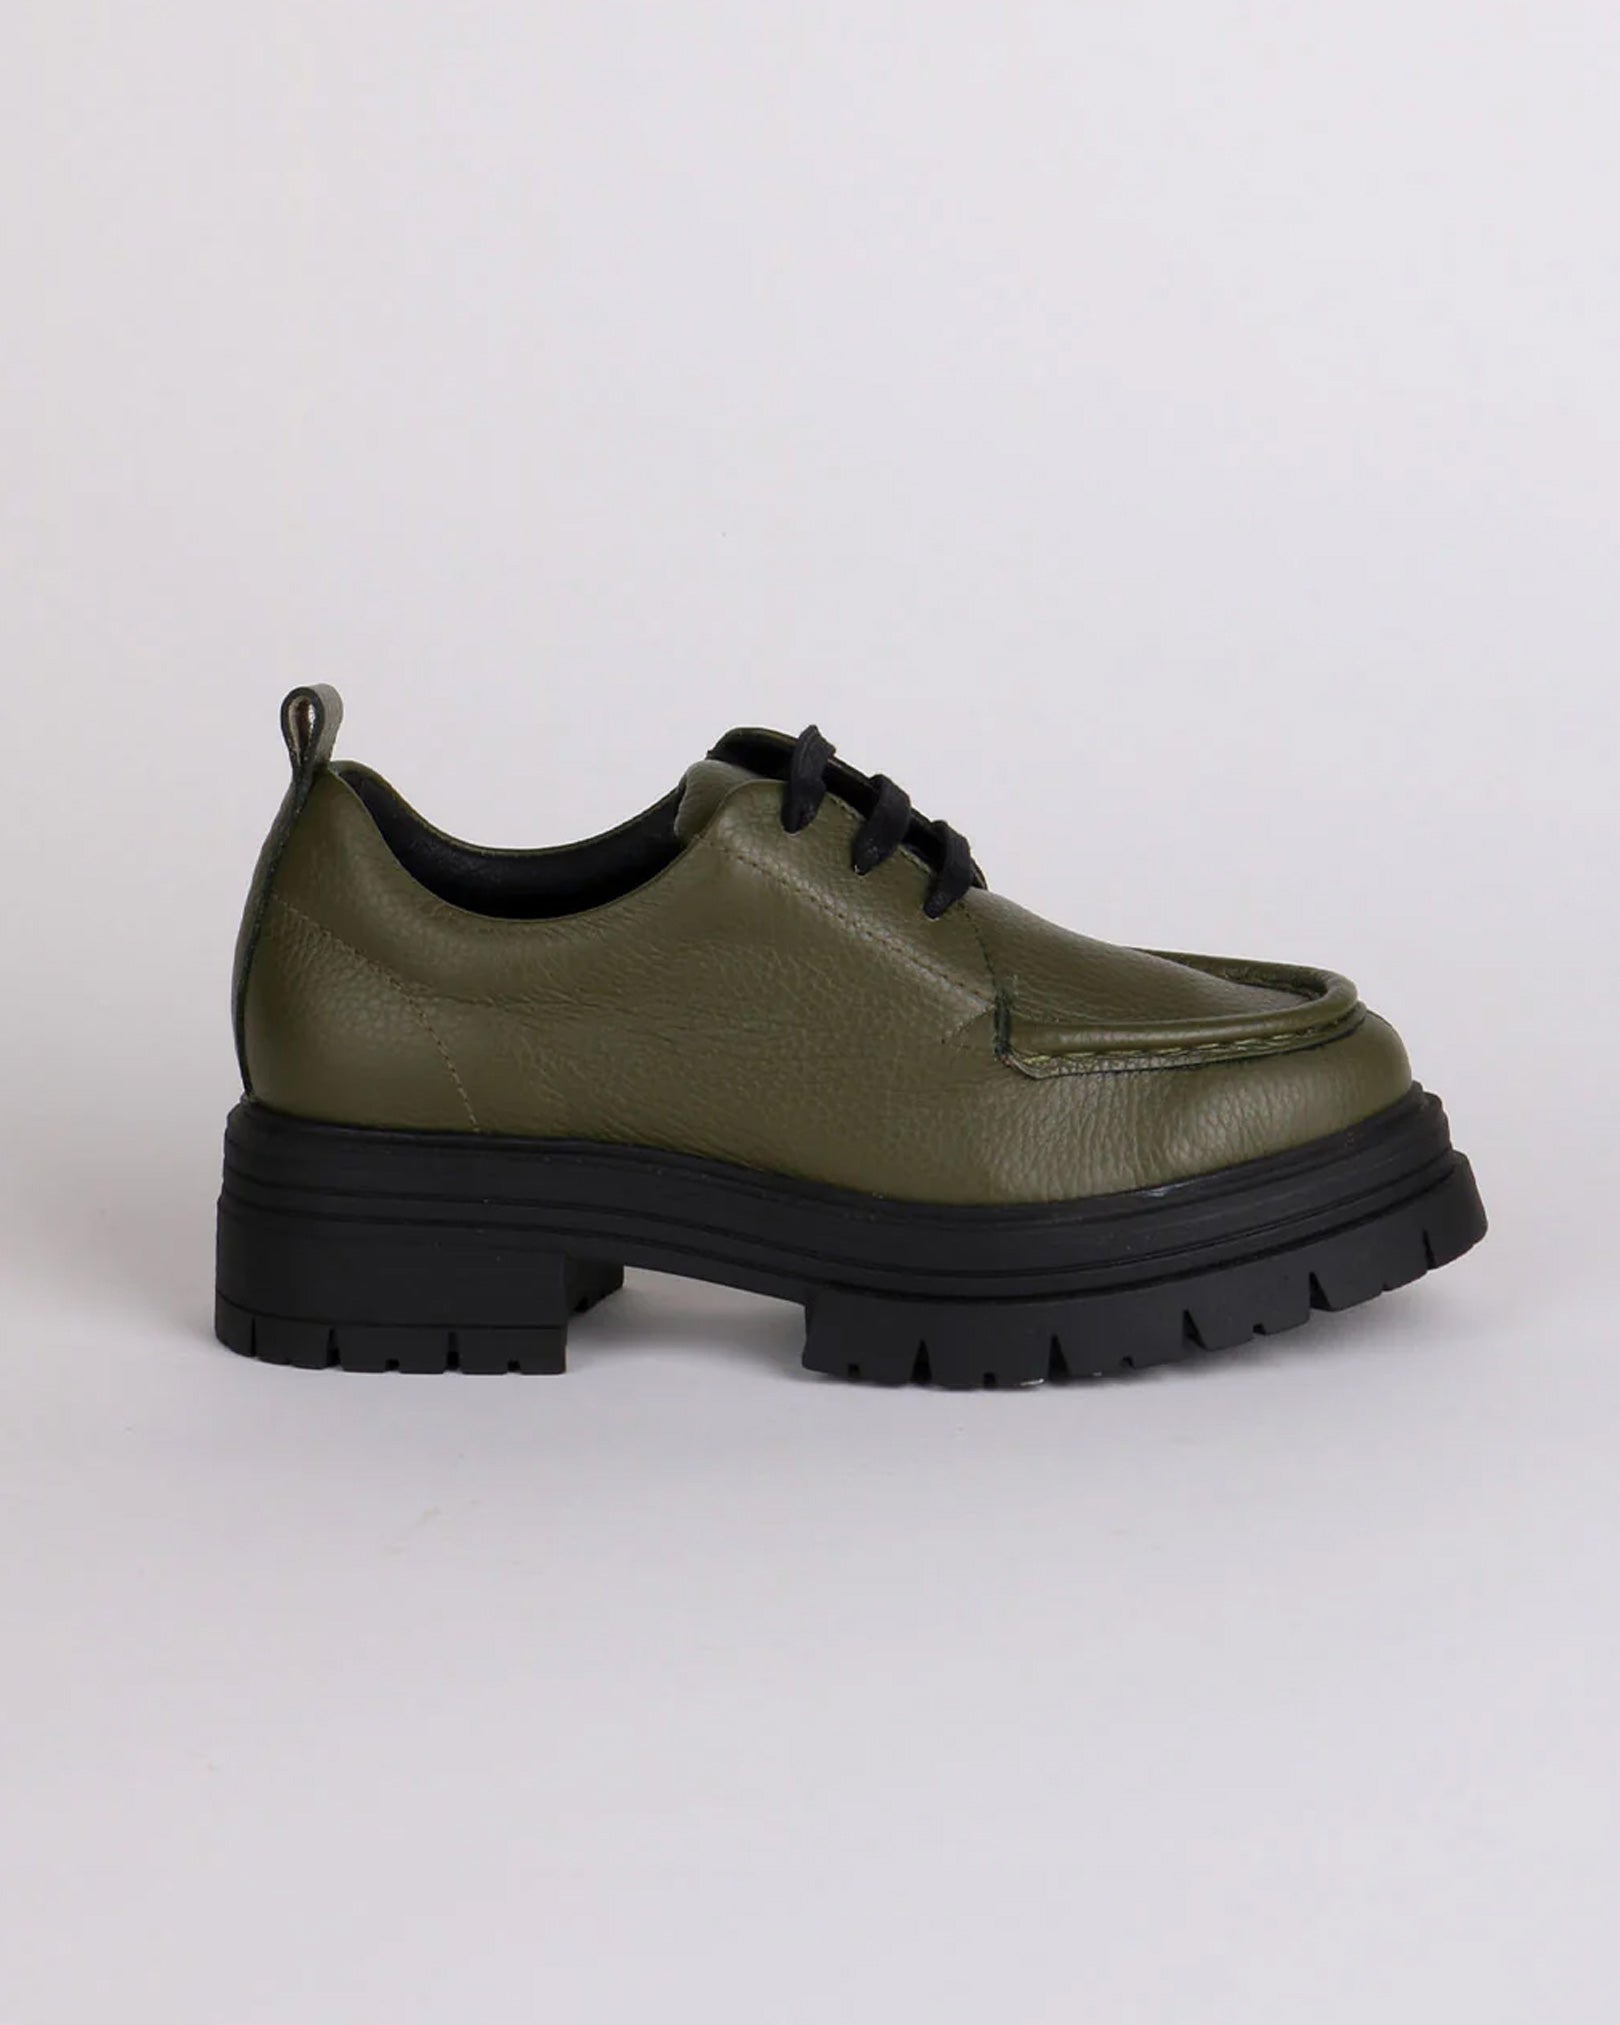 INTENTIONALLY BLANK Barbar Lug Sole Oxford in Hunter available at Lahn.shop